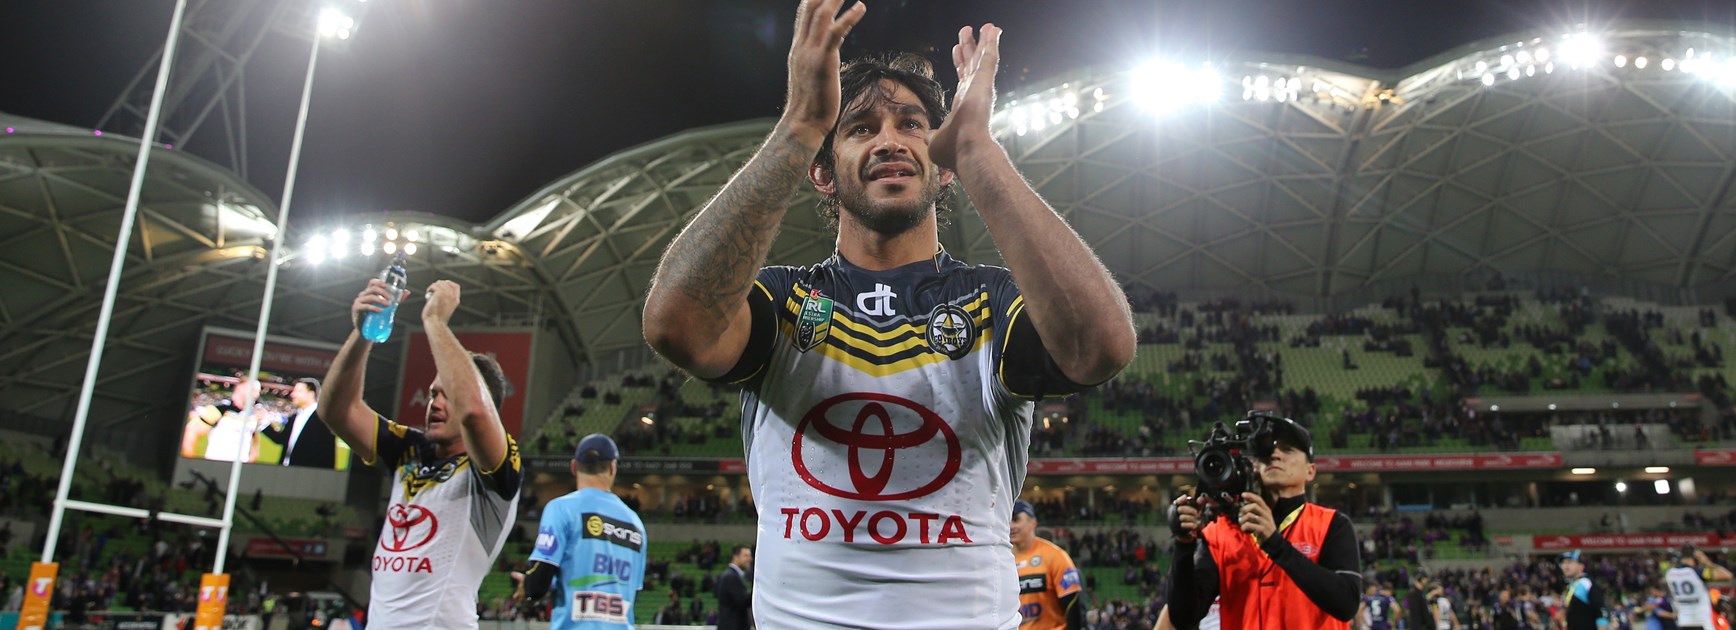 Thurston voted rugby league's greatest Indigenous player